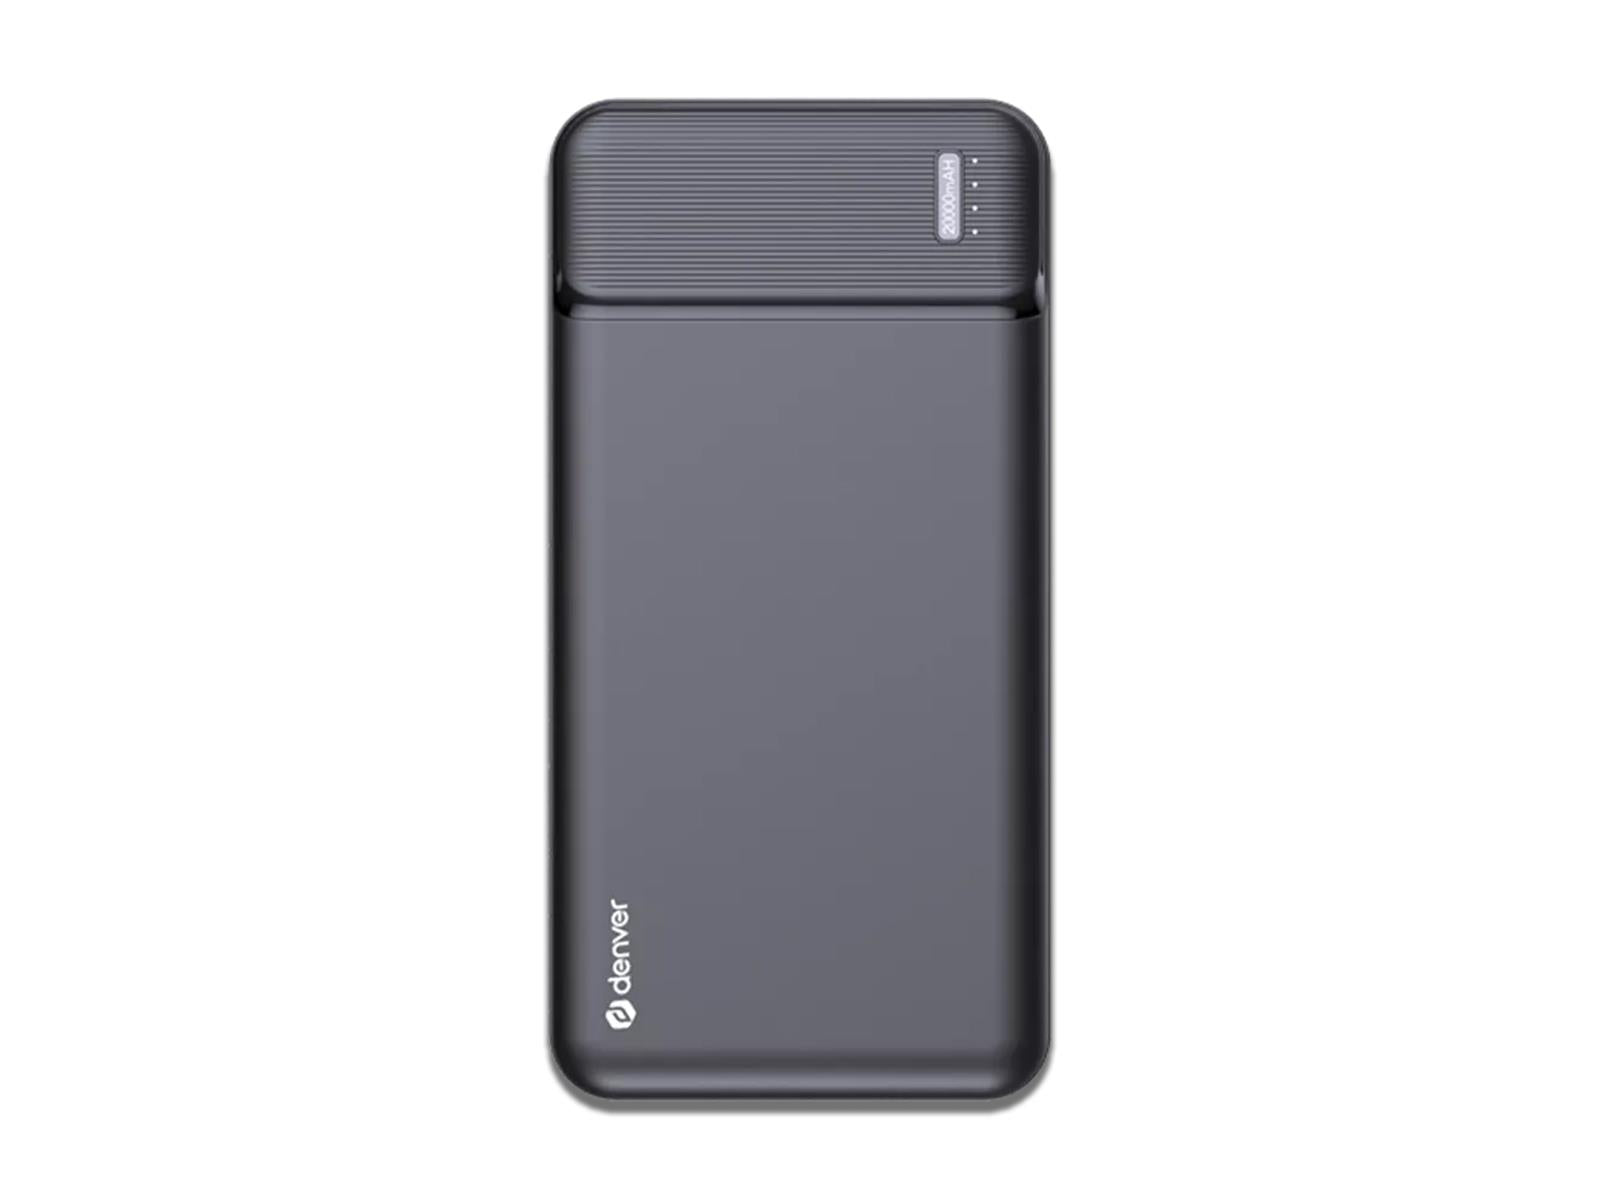 Denver High Capacity Portable Charger In 20,000mAh Front View